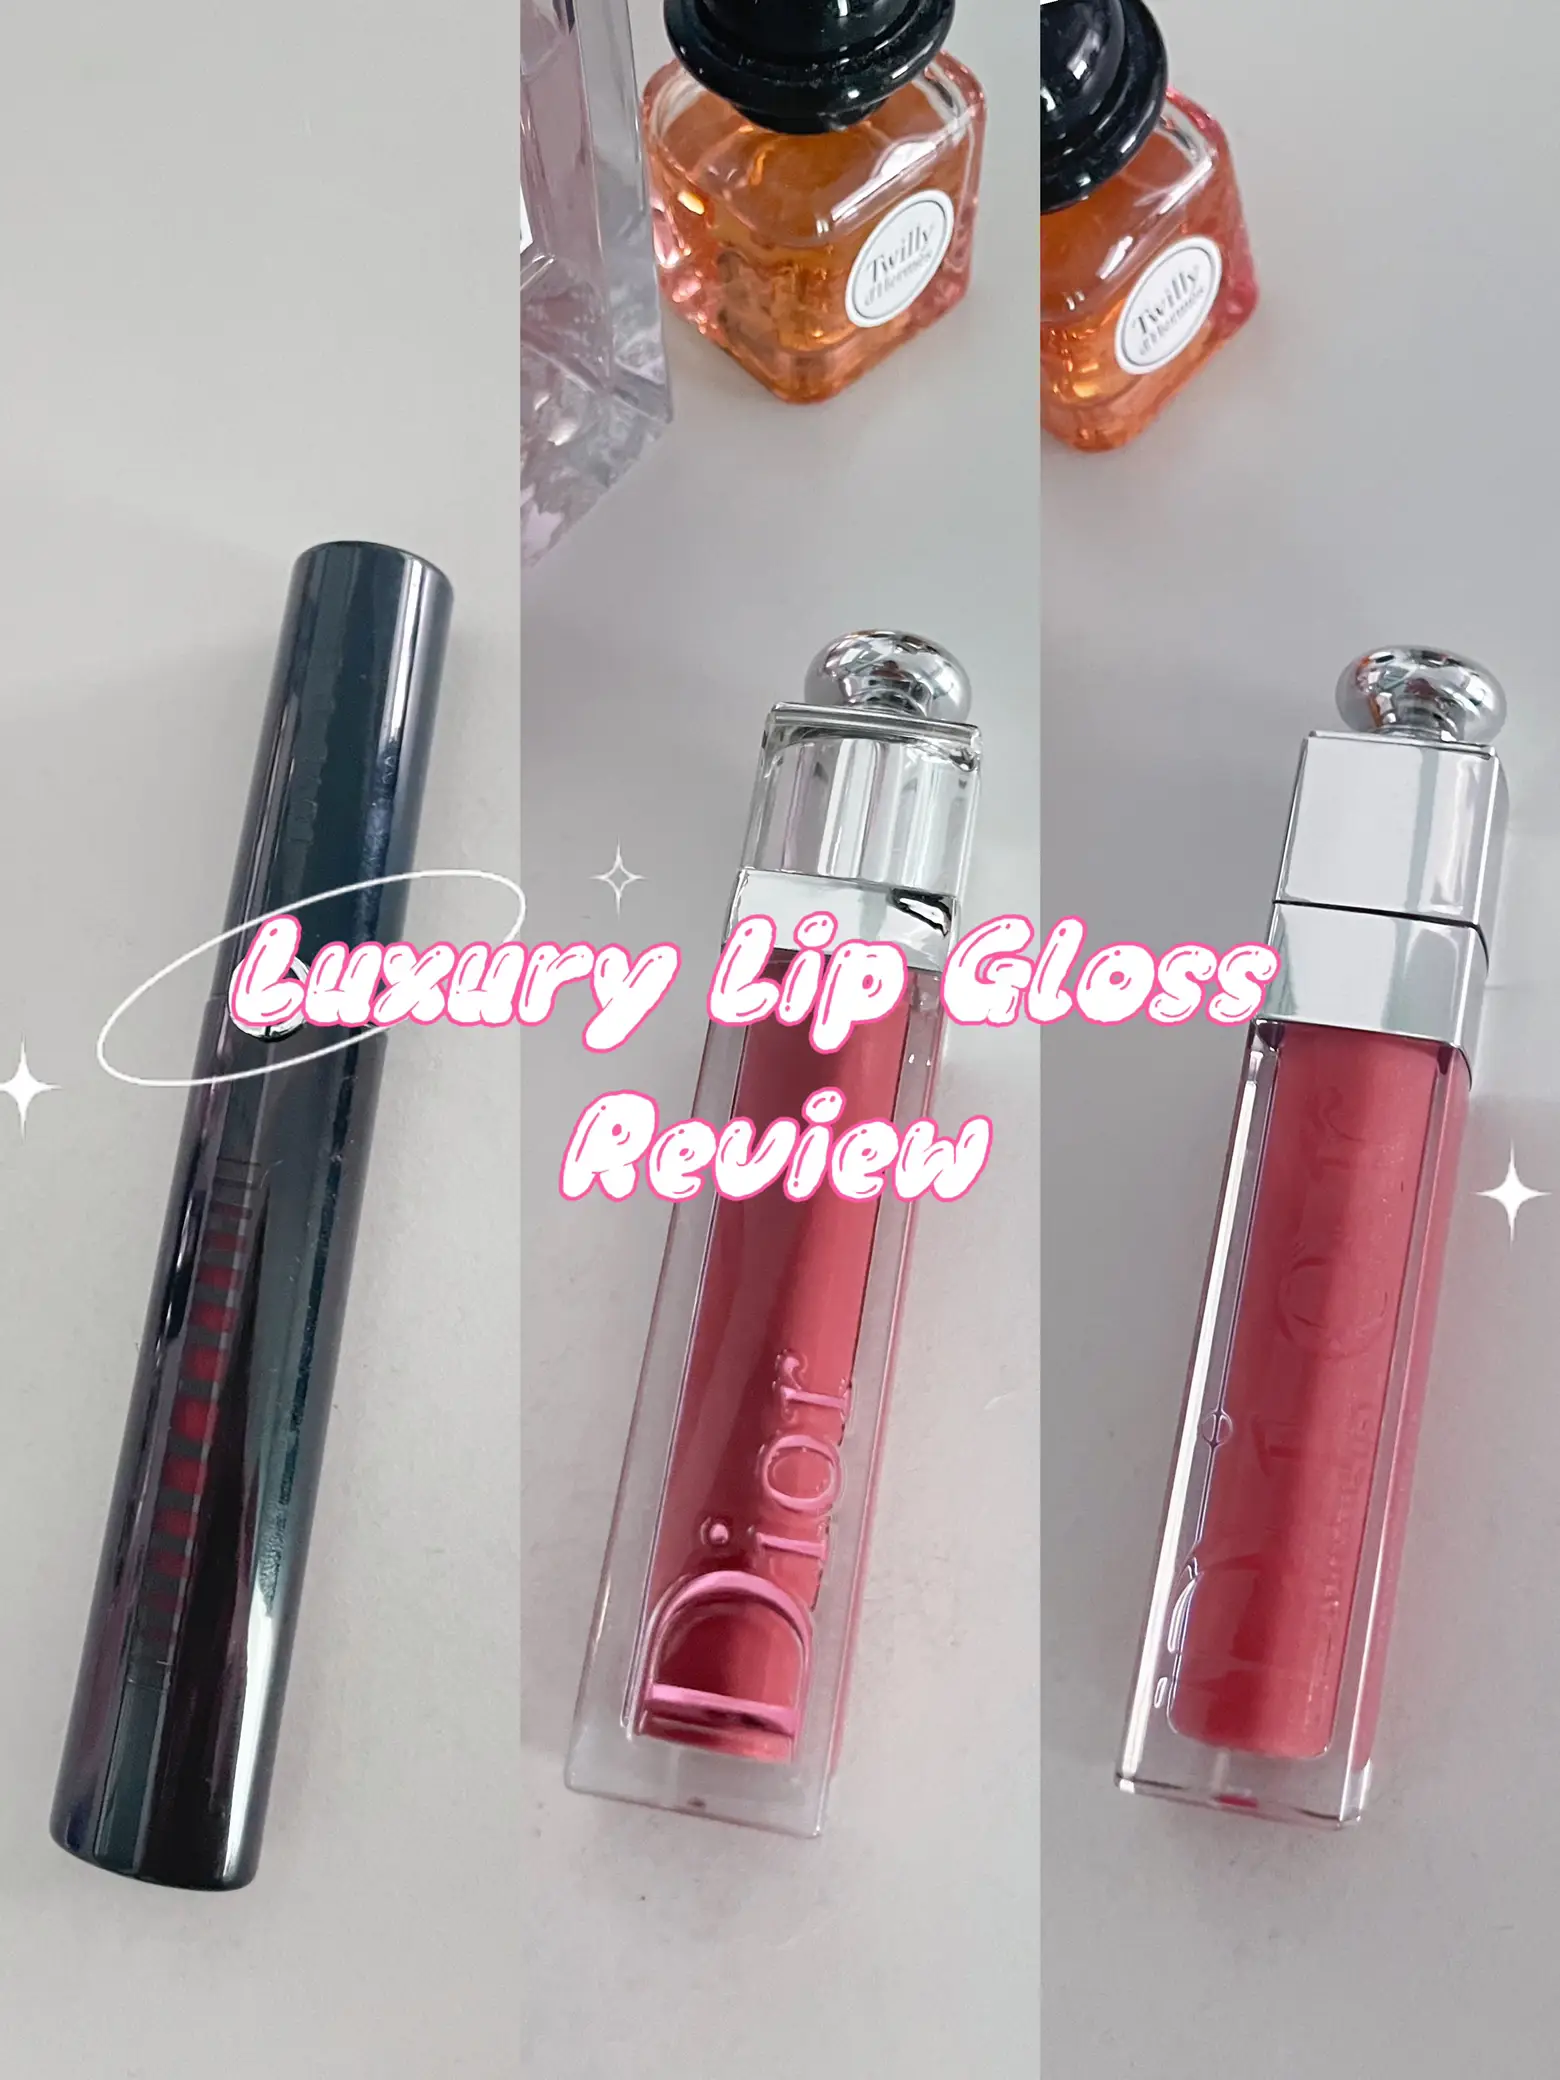 LUXURY LIP GLOSS REVIEW✨, Gallery posted by chayanne.c